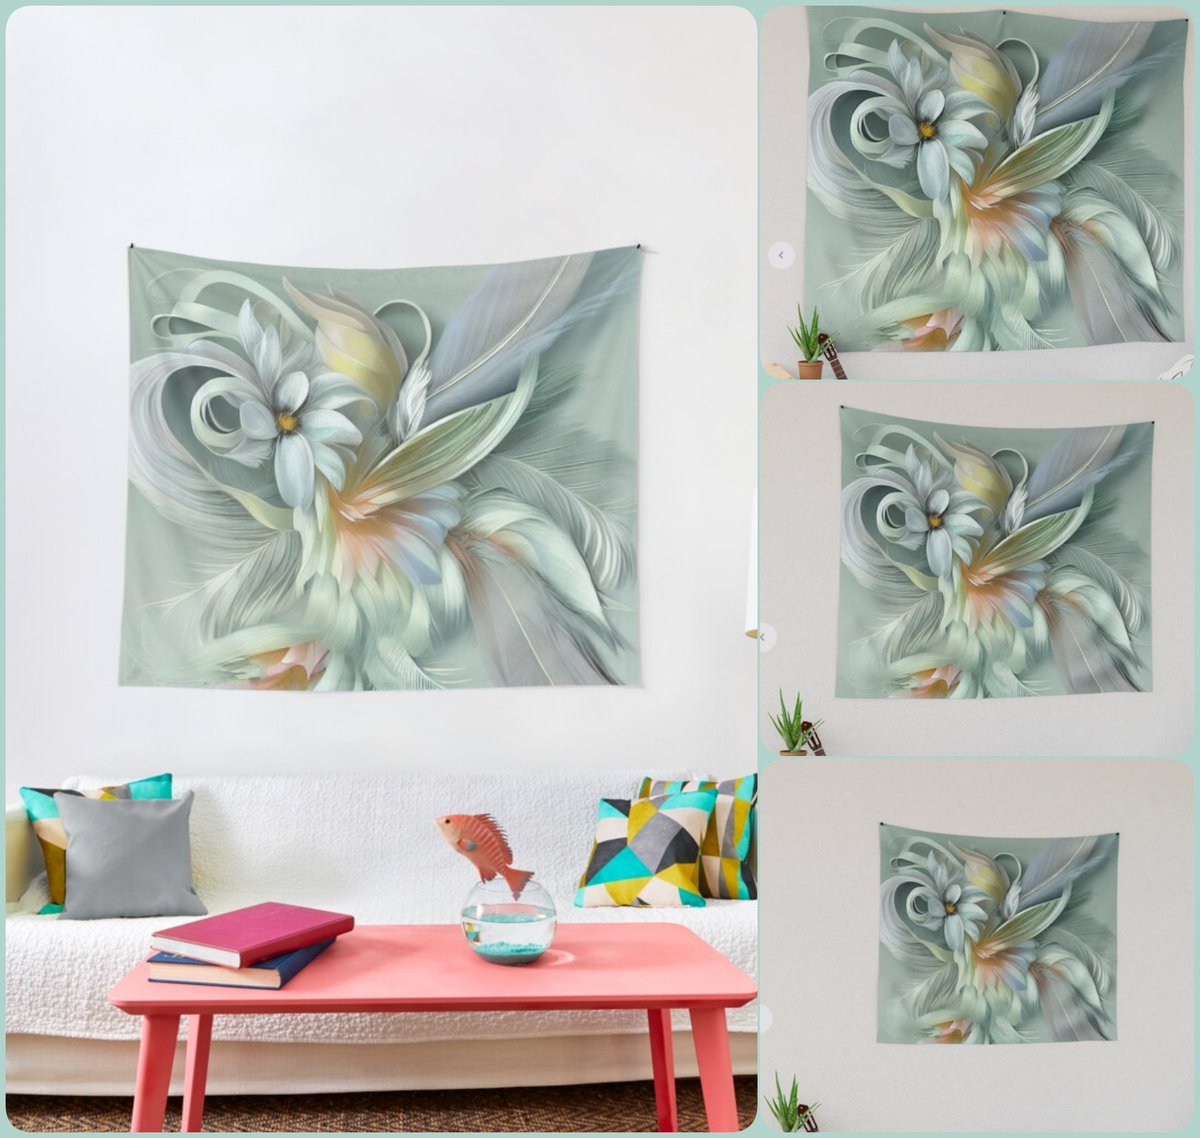 Secluded Moments Tapestry~by Art Falaxy ~The Art of Uniqueness!~ #accents #wall #art #artfalaxy #canvas #framed #metal #posters #prints #redbubble #tapestry #wood #trendy #modern #FindYourThing redbubble.com/i/tapestry/Sec…